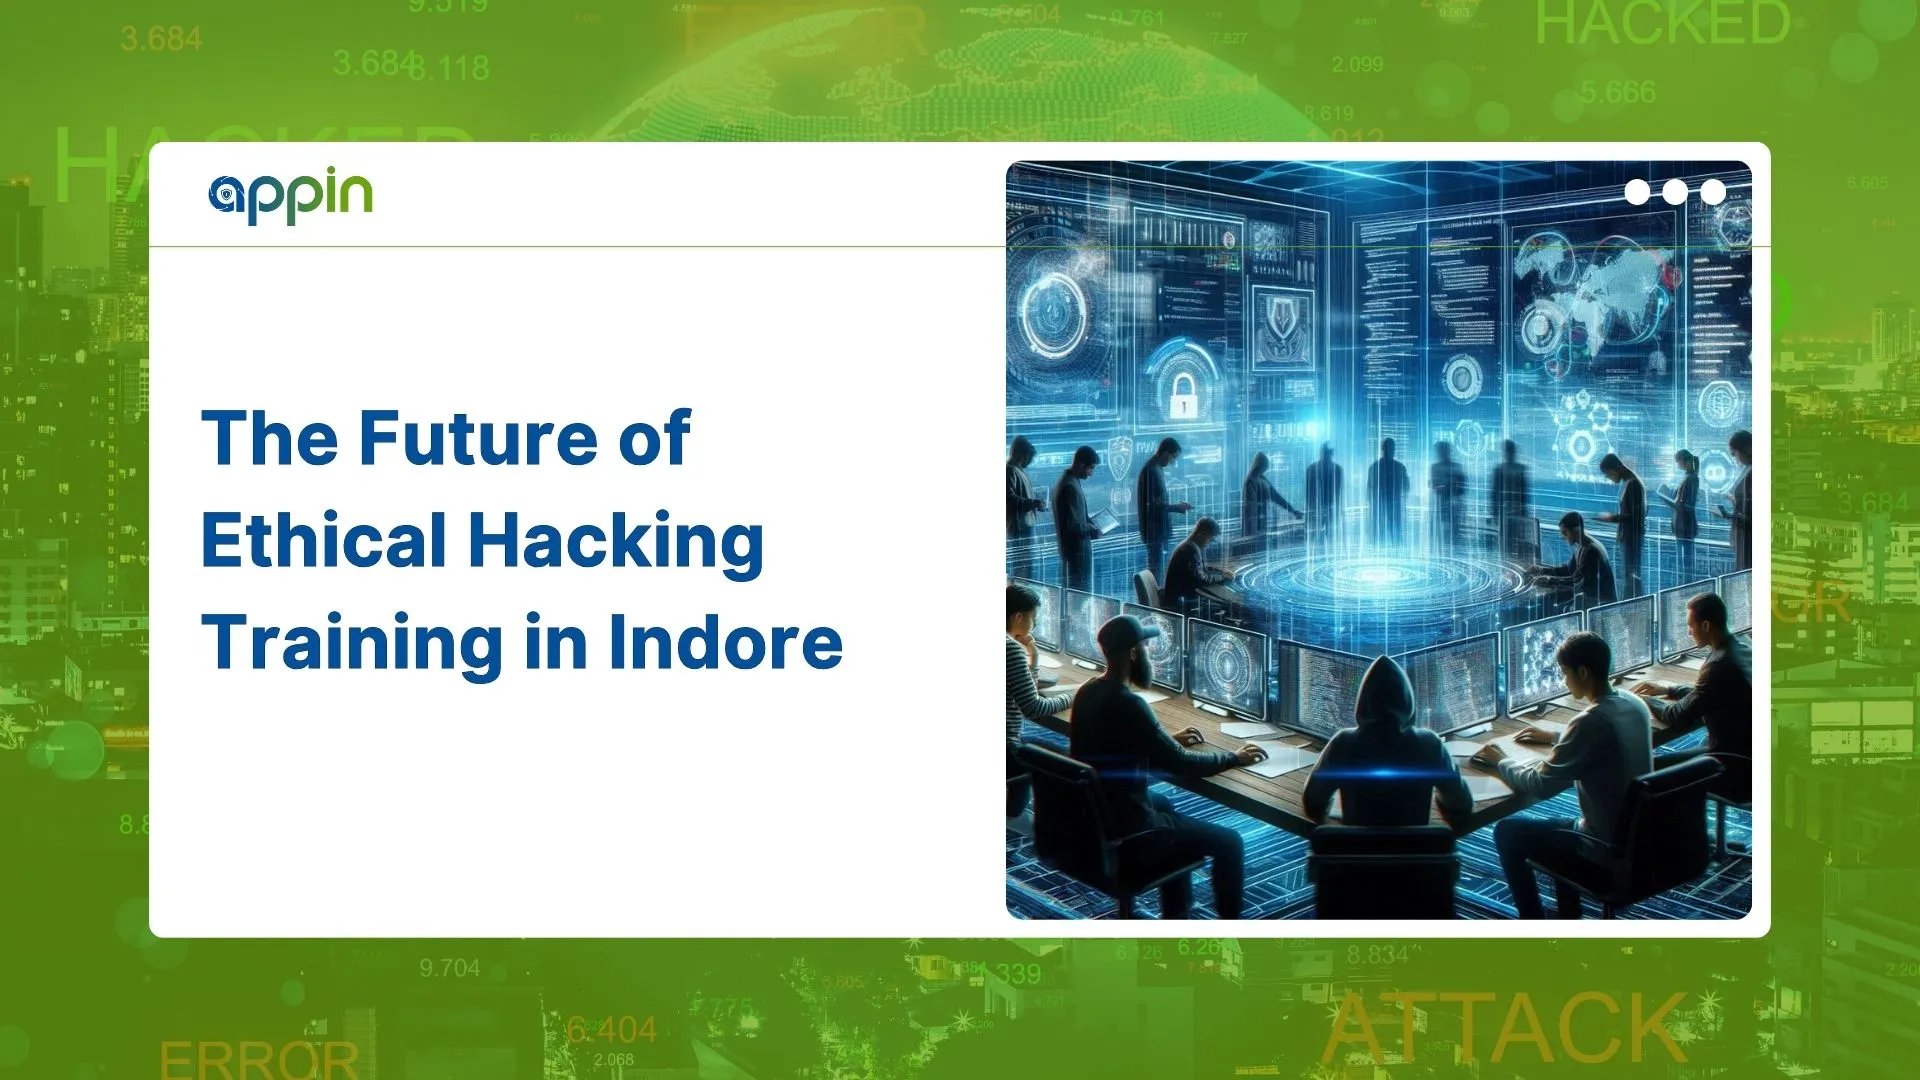 The Future of Ethical Hacking Training in Indore